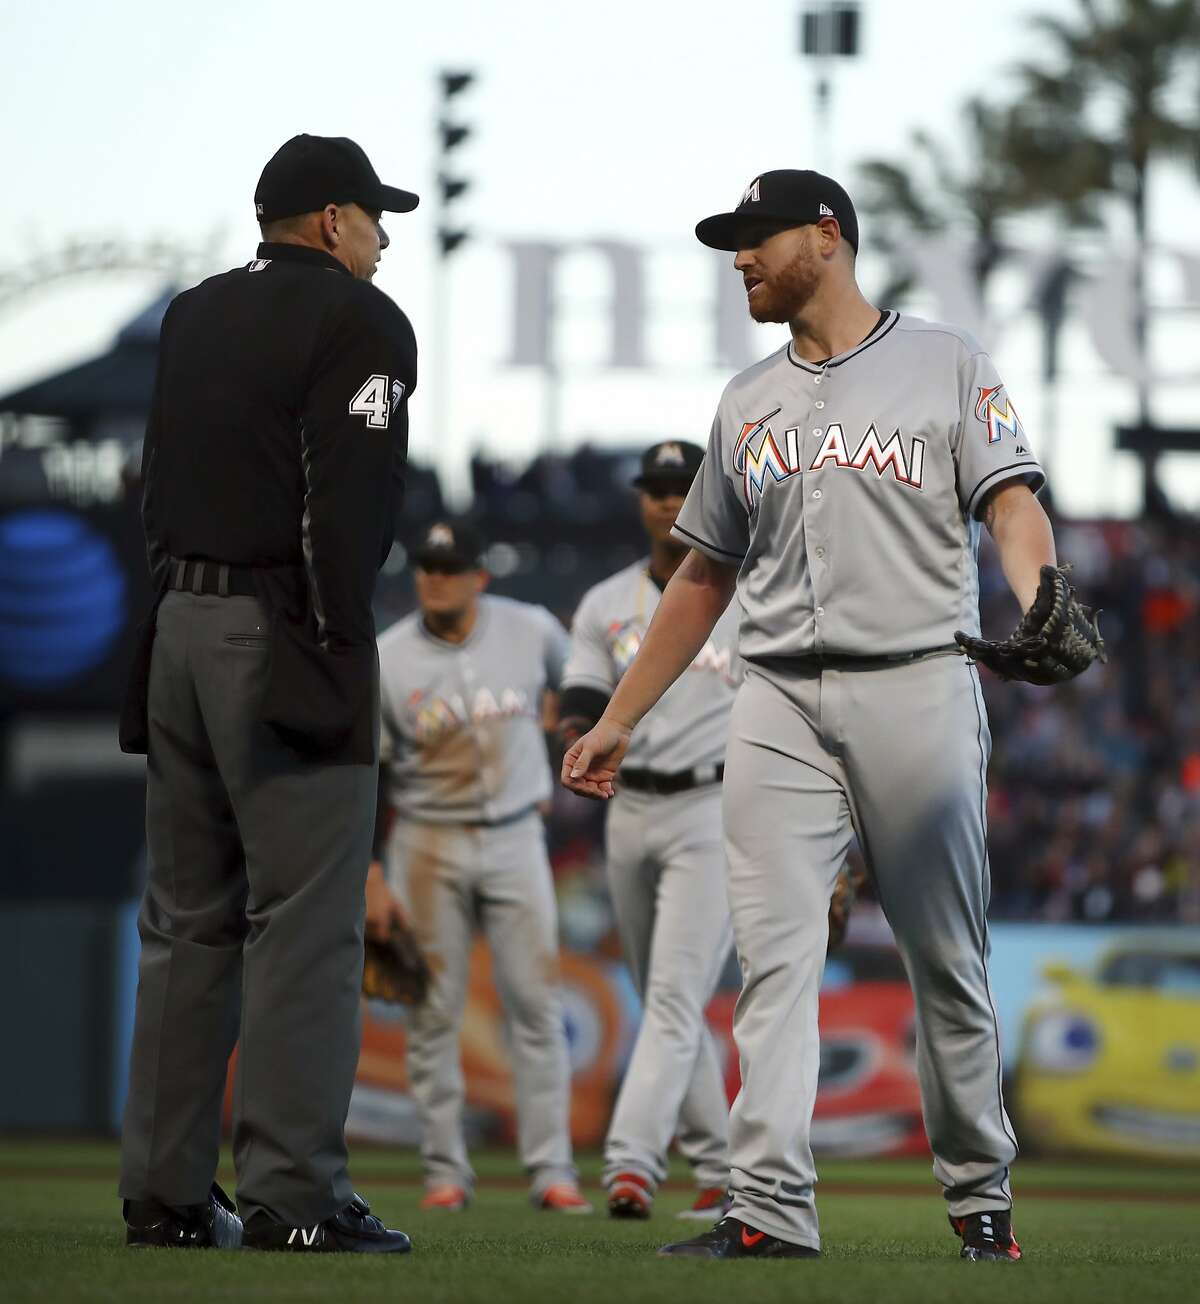 Miami Marlins pitcher Dan Straily, right, speaks with home plate umpire Andy Fletcher after Straily hit San Francisco Giants' Buster Posey with a pitch and was ejected by Fletcher during the second inning of a baseball game Tuesday, June 19, 2018, in San Francisco. (AP Photo/Ben Margot)